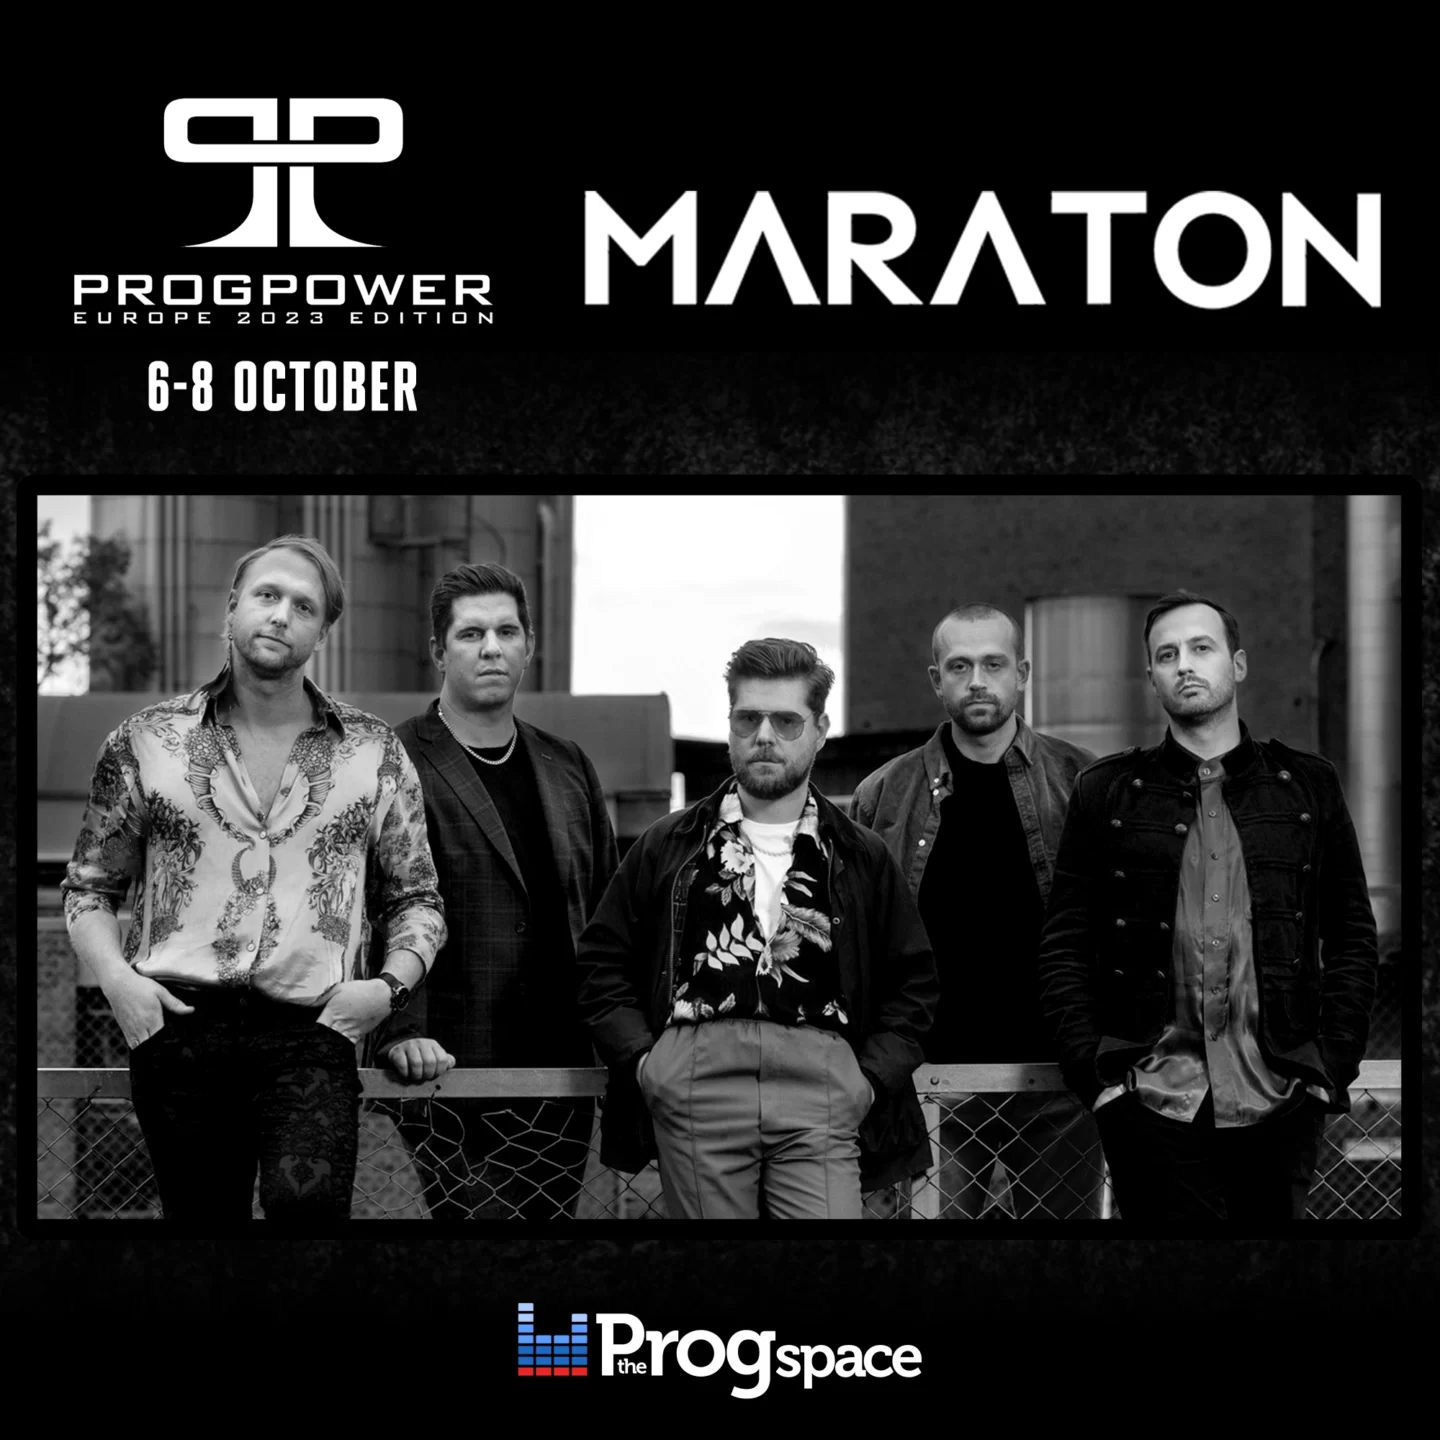 Maraton is the 8th band announced for ProgPower Europe 2023!